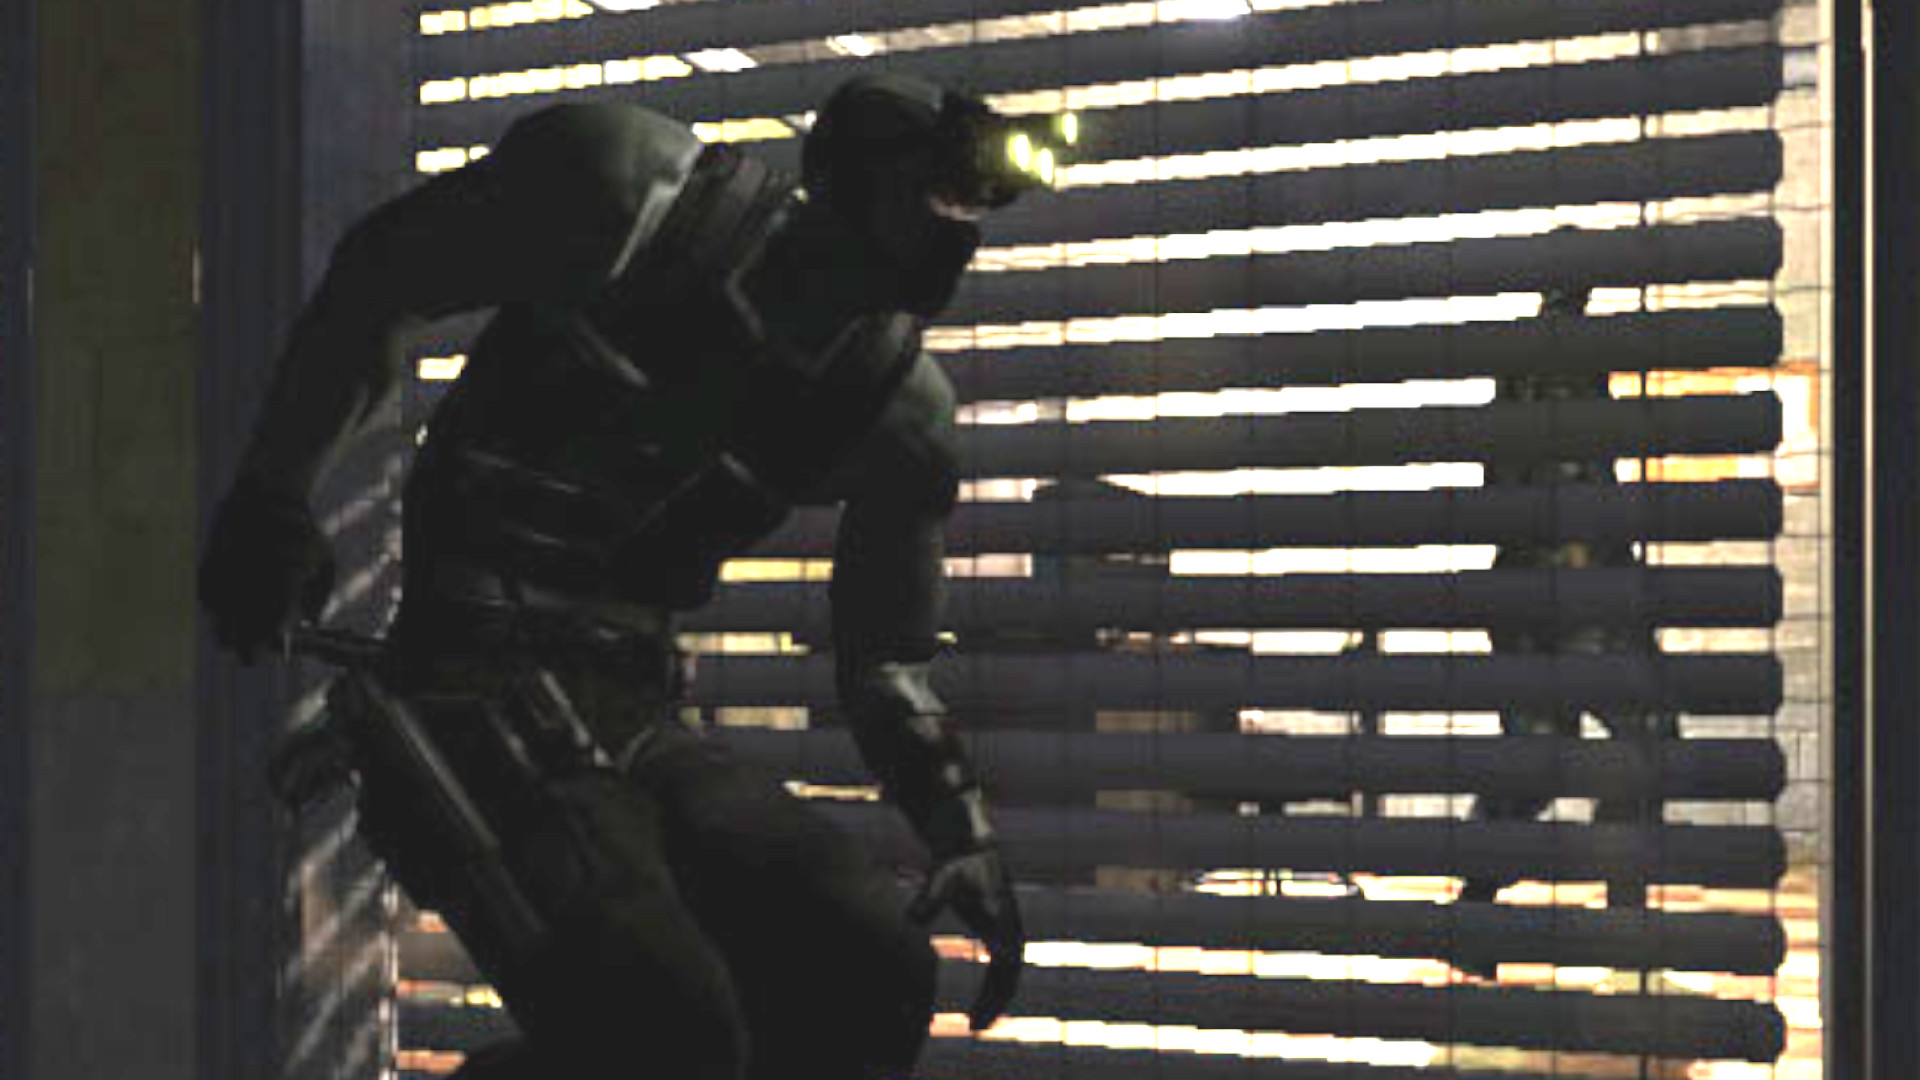 Original Splinter Cell Free On PC This Month